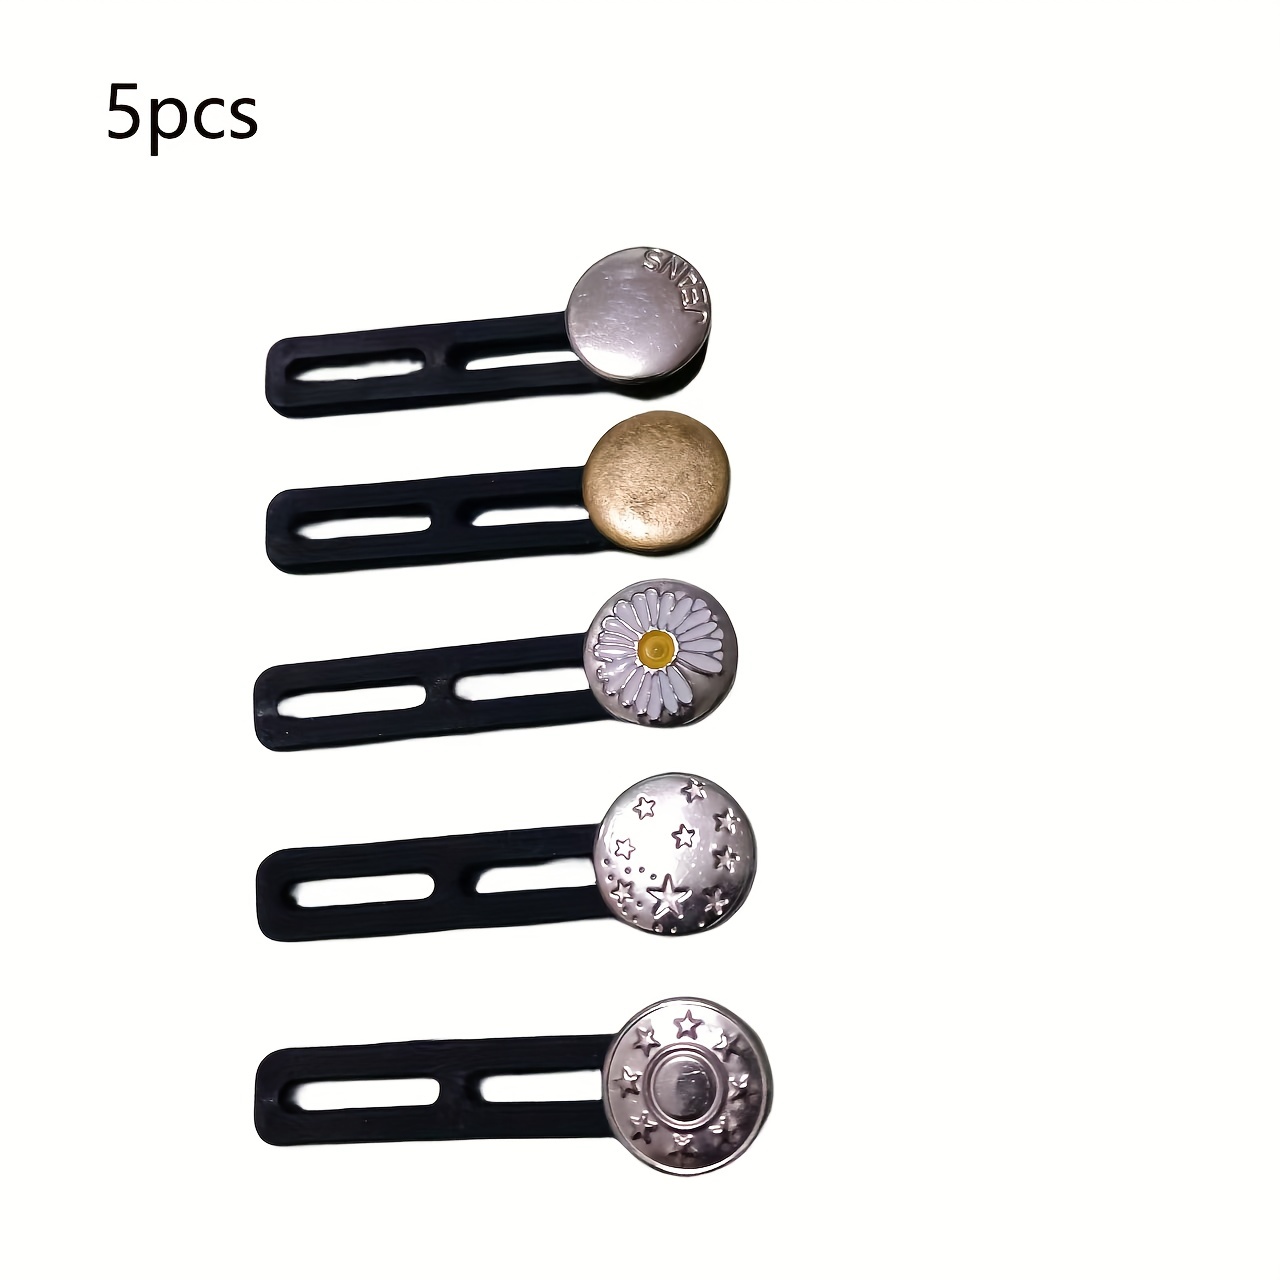 2pcs/4pcs Magical Metal Button Extender, No Sewing Required, Perfect For  Repairing Jeans, Shirts, Jackets, And Pants For Double Wear